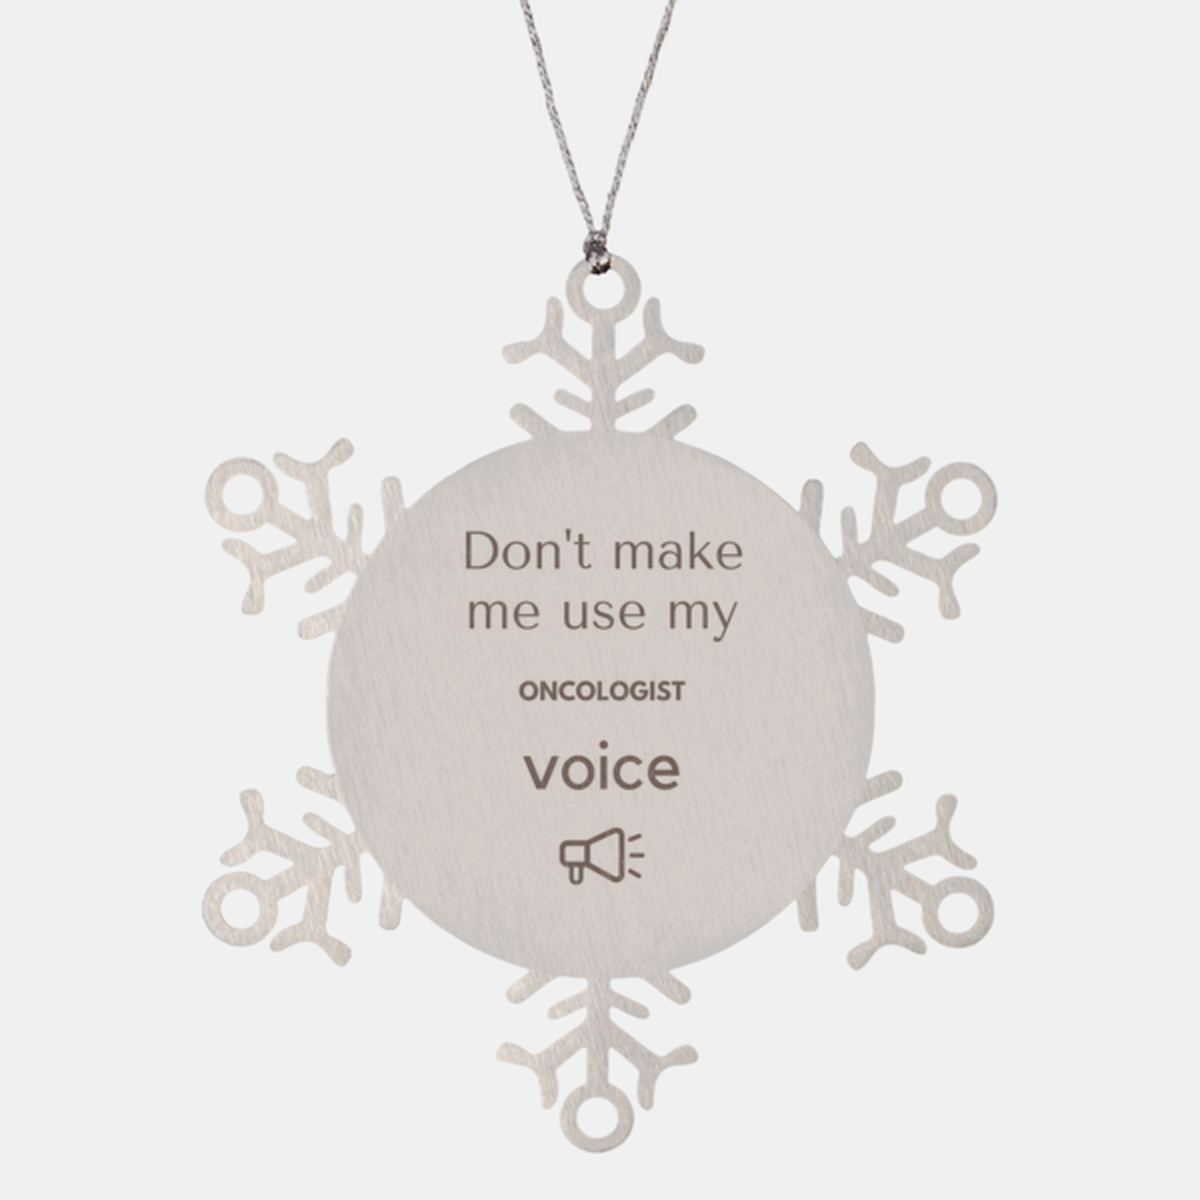 Don't make me use my Oncologist voice, Sarcasm Oncologist Ornament Gifts, Christmas Oncologist Snowflake Ornament Unique Gifts For Oncologist Coworkers, Men, Women, Colleague, Friends